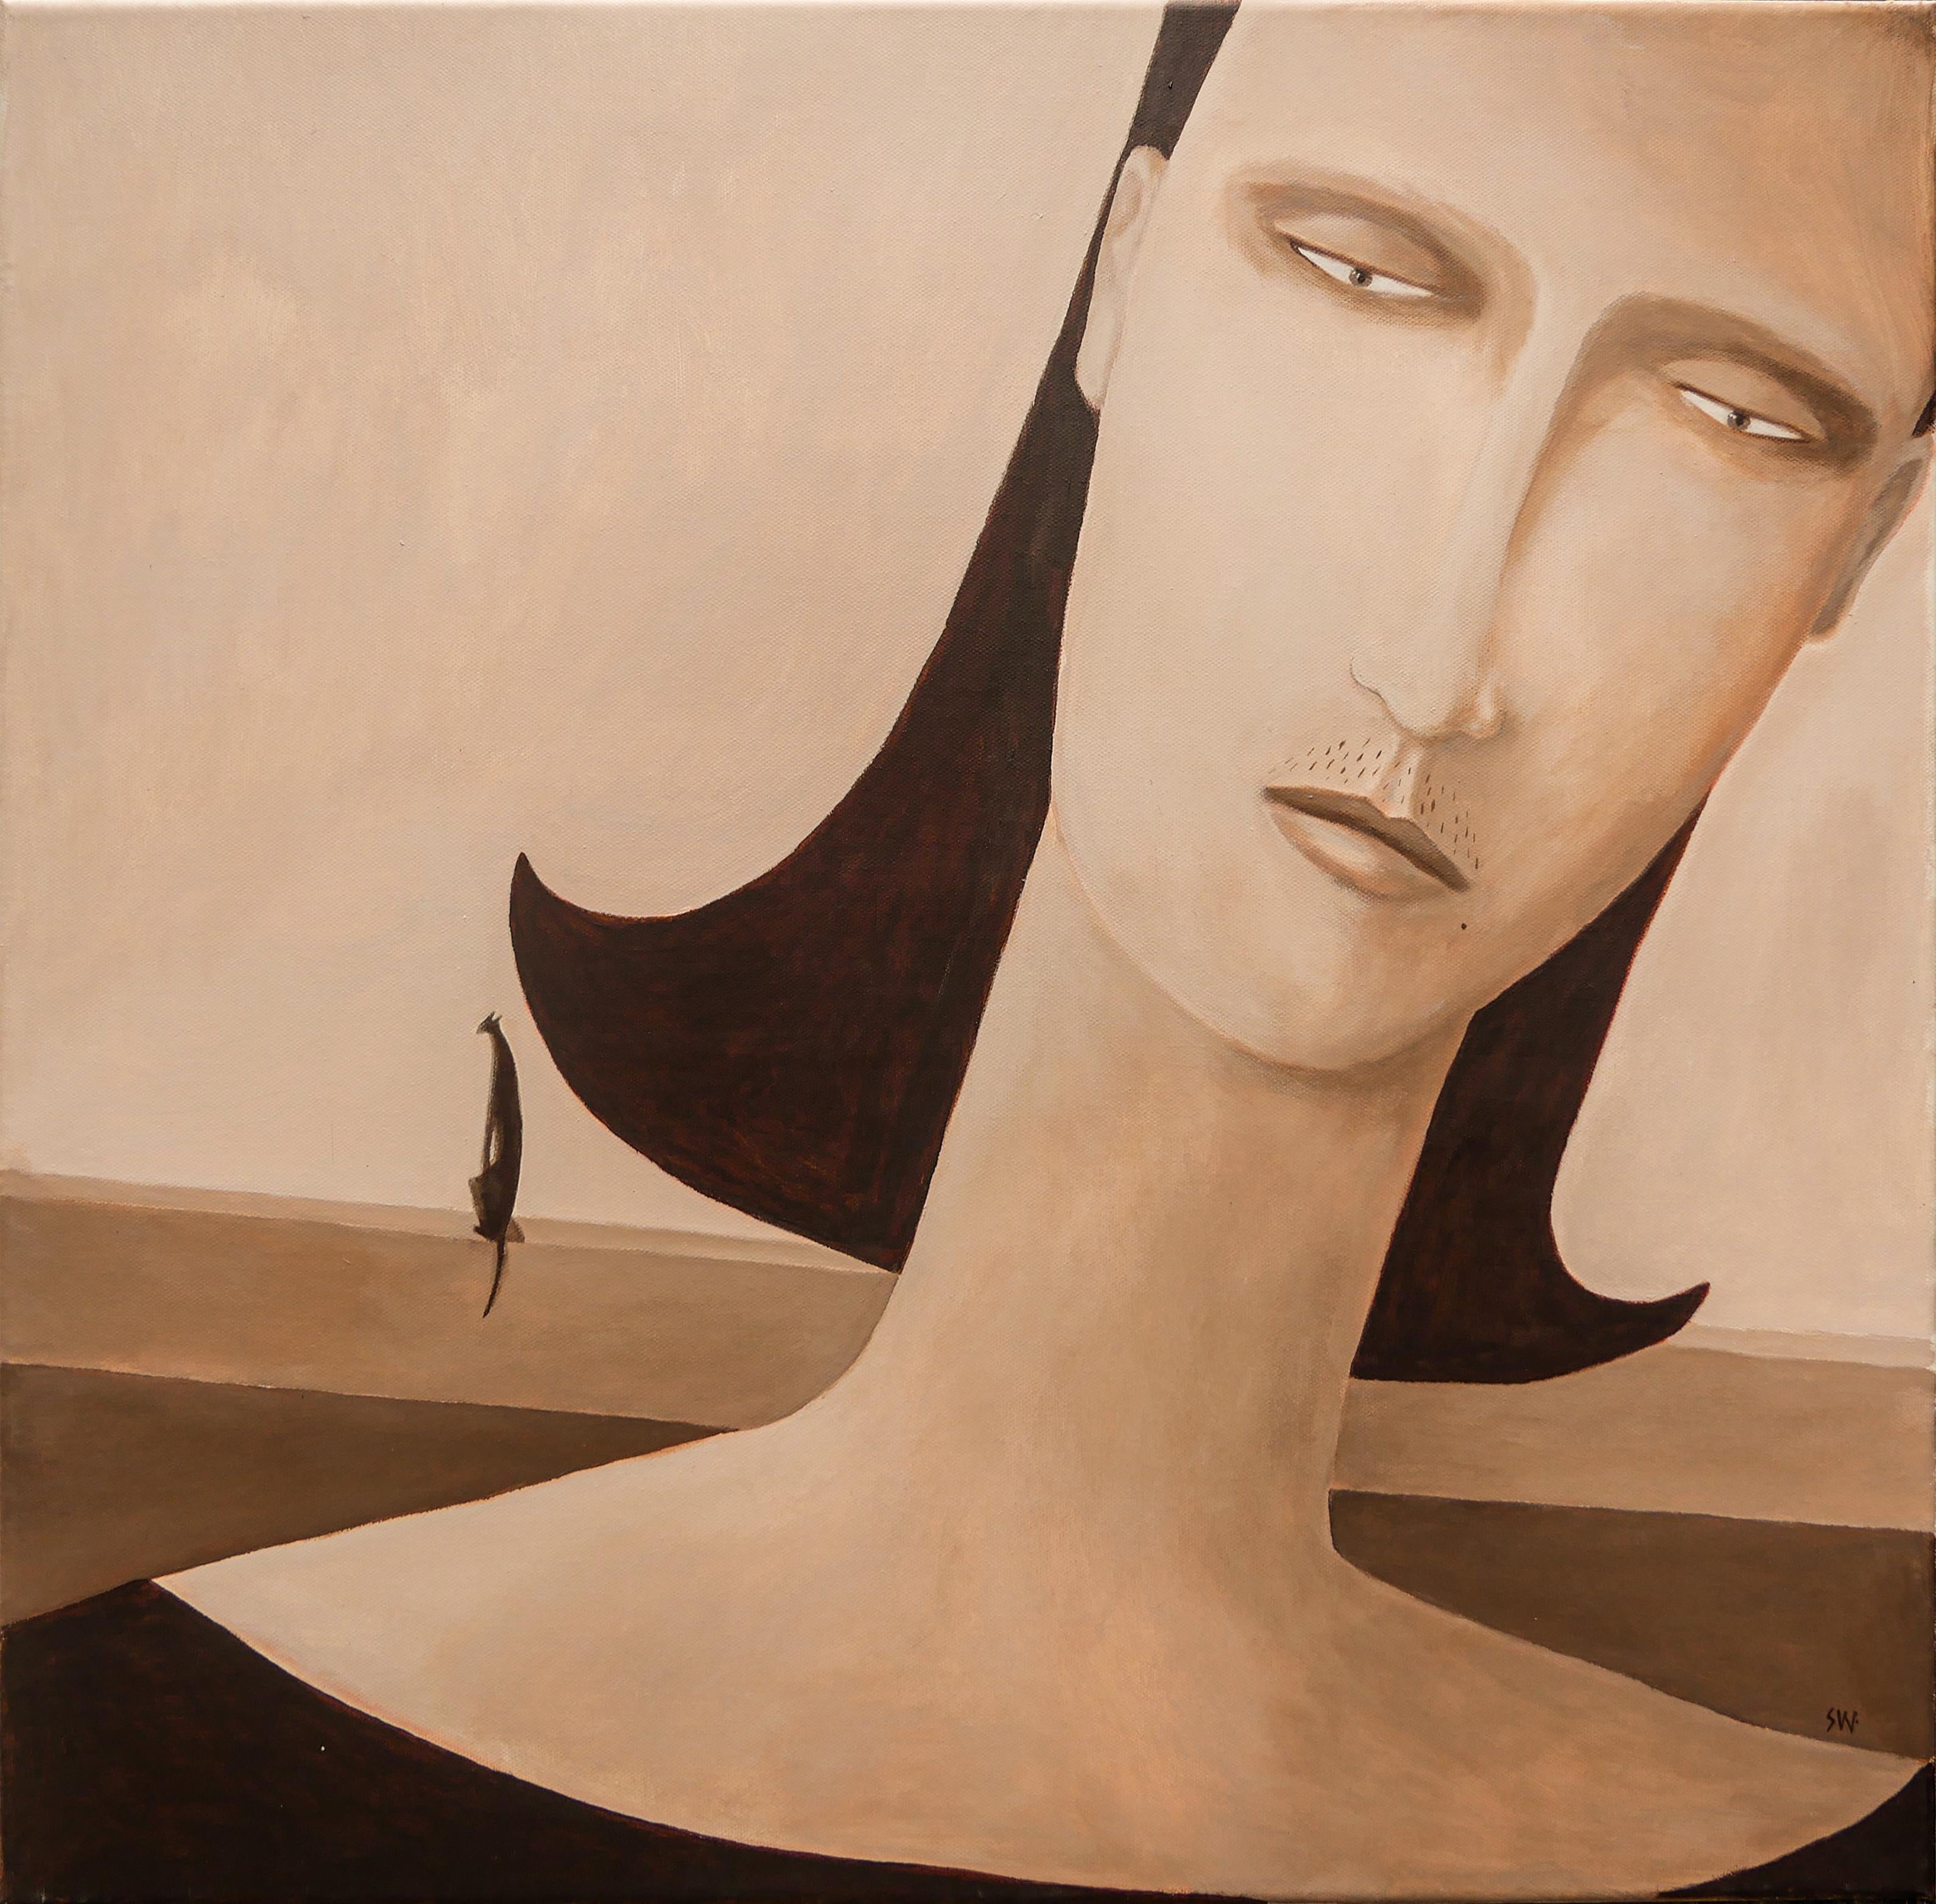 Scott Woodard Abstract Painting - "The Mustache" Sepia-Toned Abstract Figurative Surrealist Lady with Cat Portrait